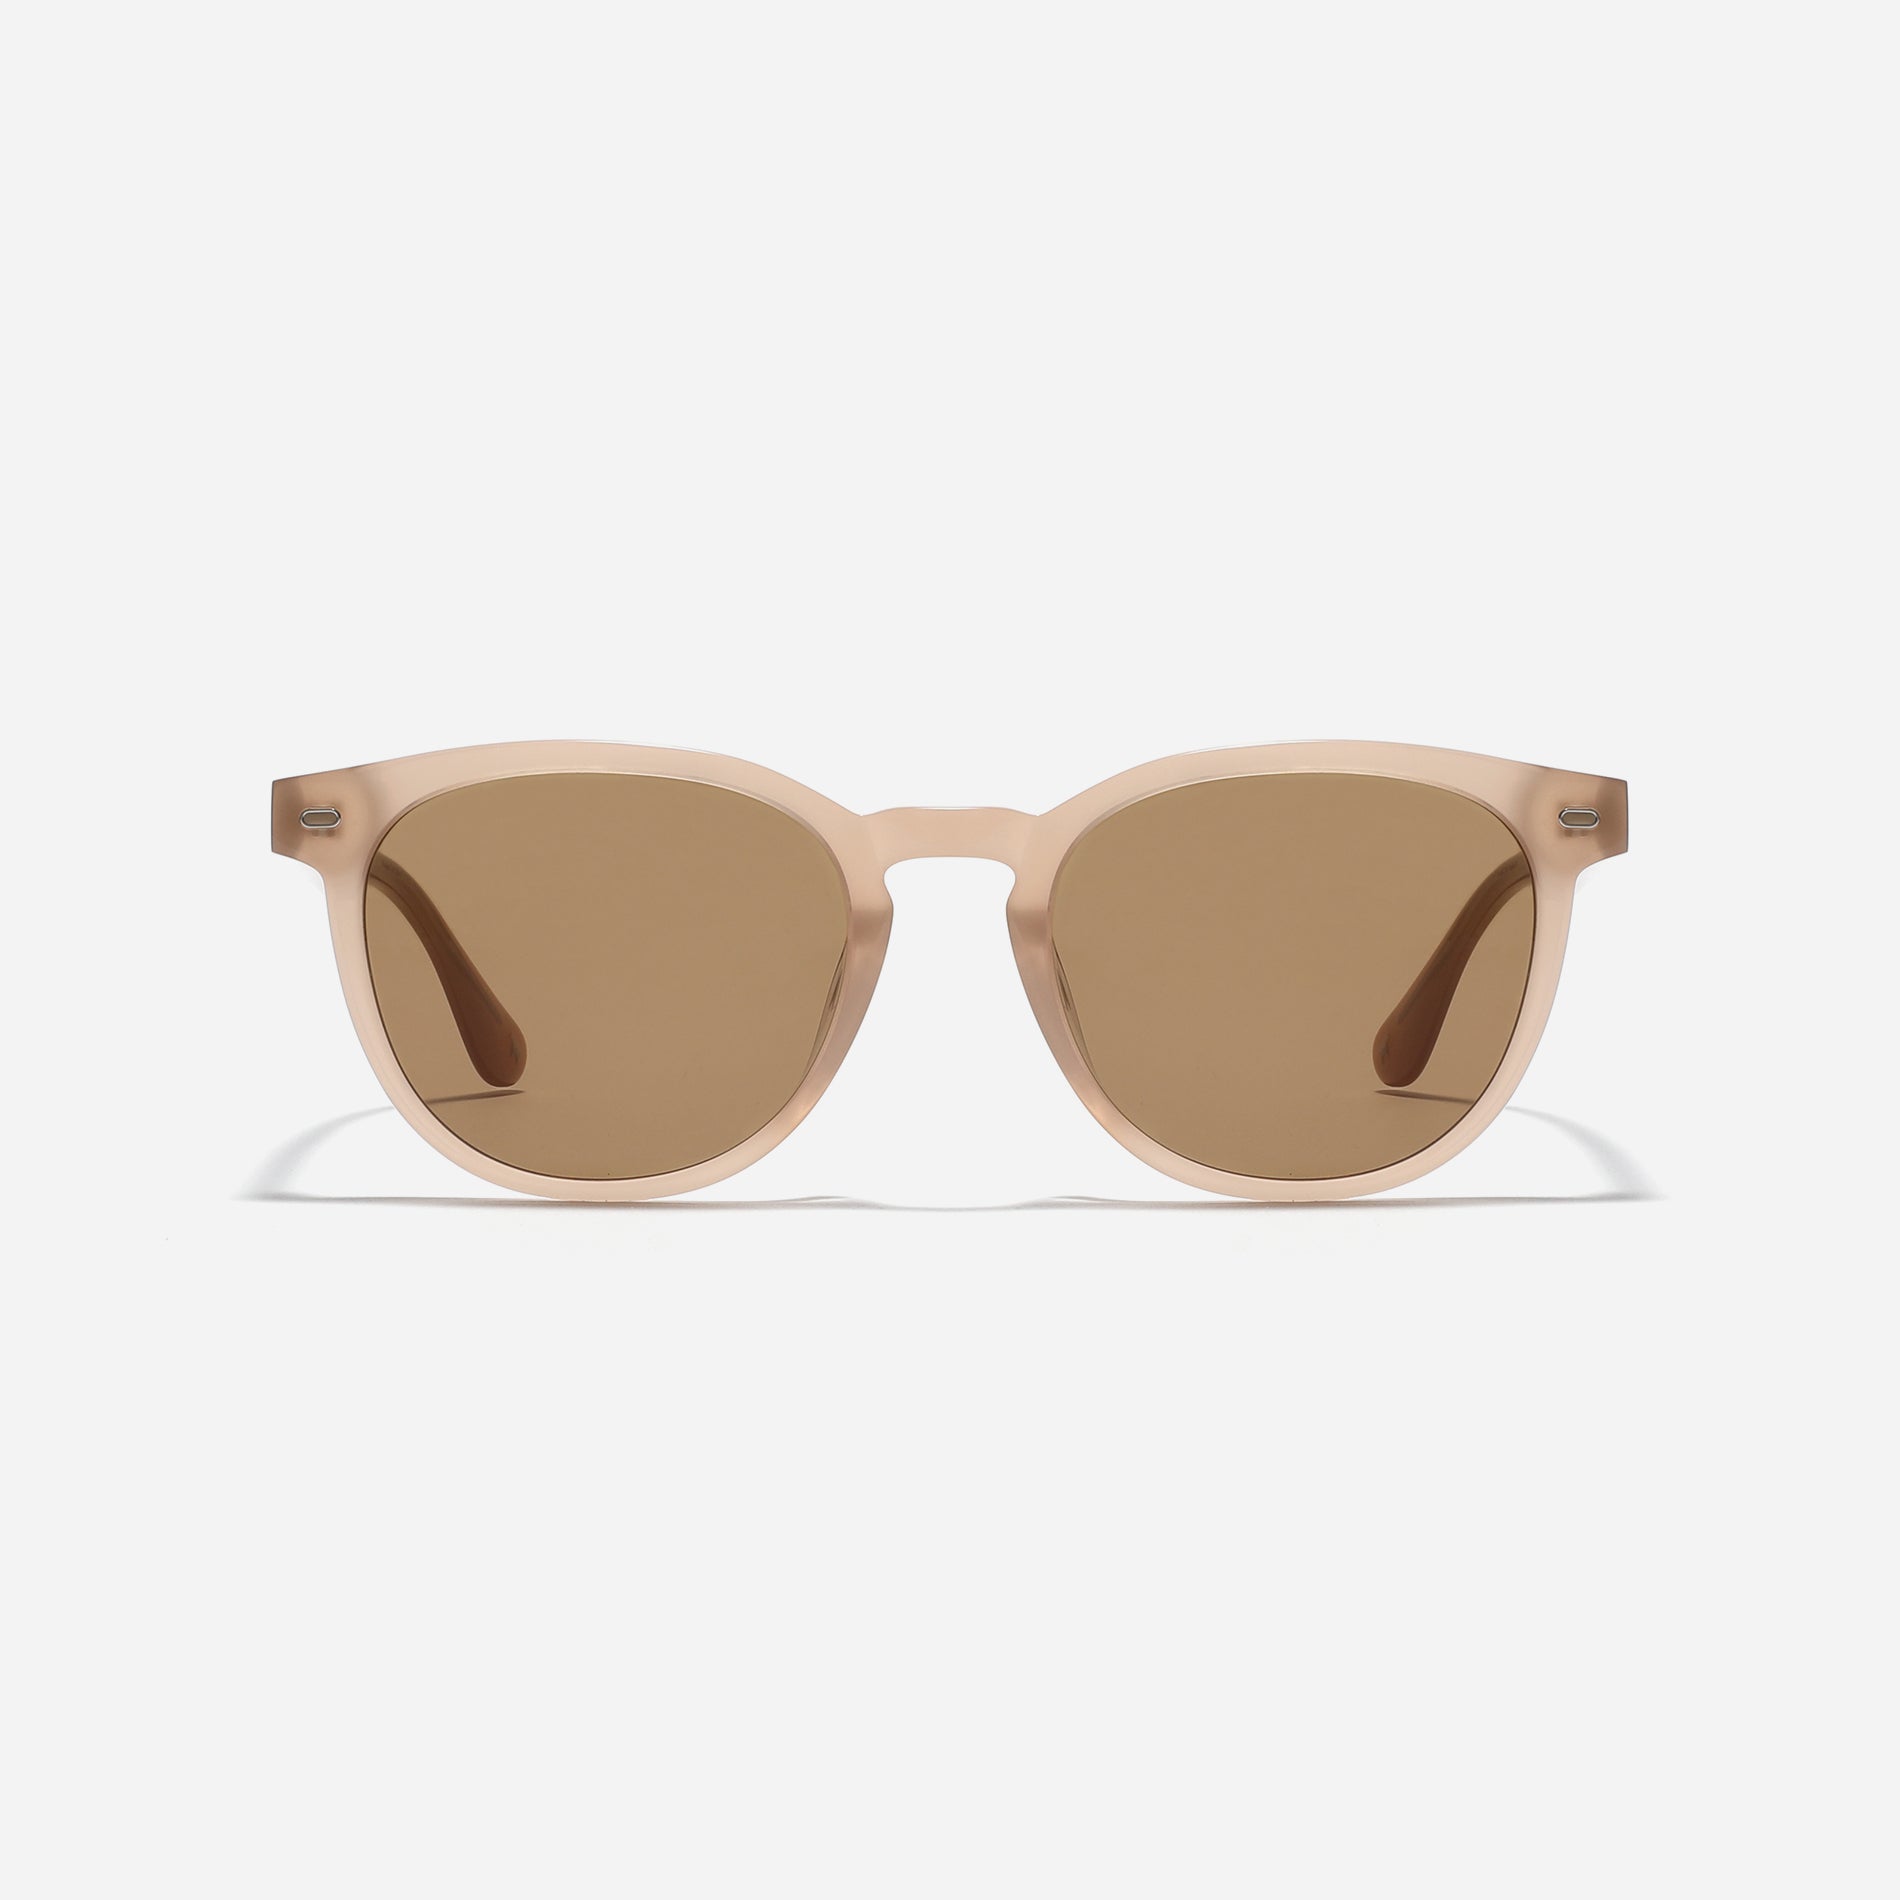 Round-shaped sunglasses from the Forest Line. With their soft form and stylish square frame, Connie offer a versatile and fashionable option for everyday wear, especially appealing to those new to sunglasses.